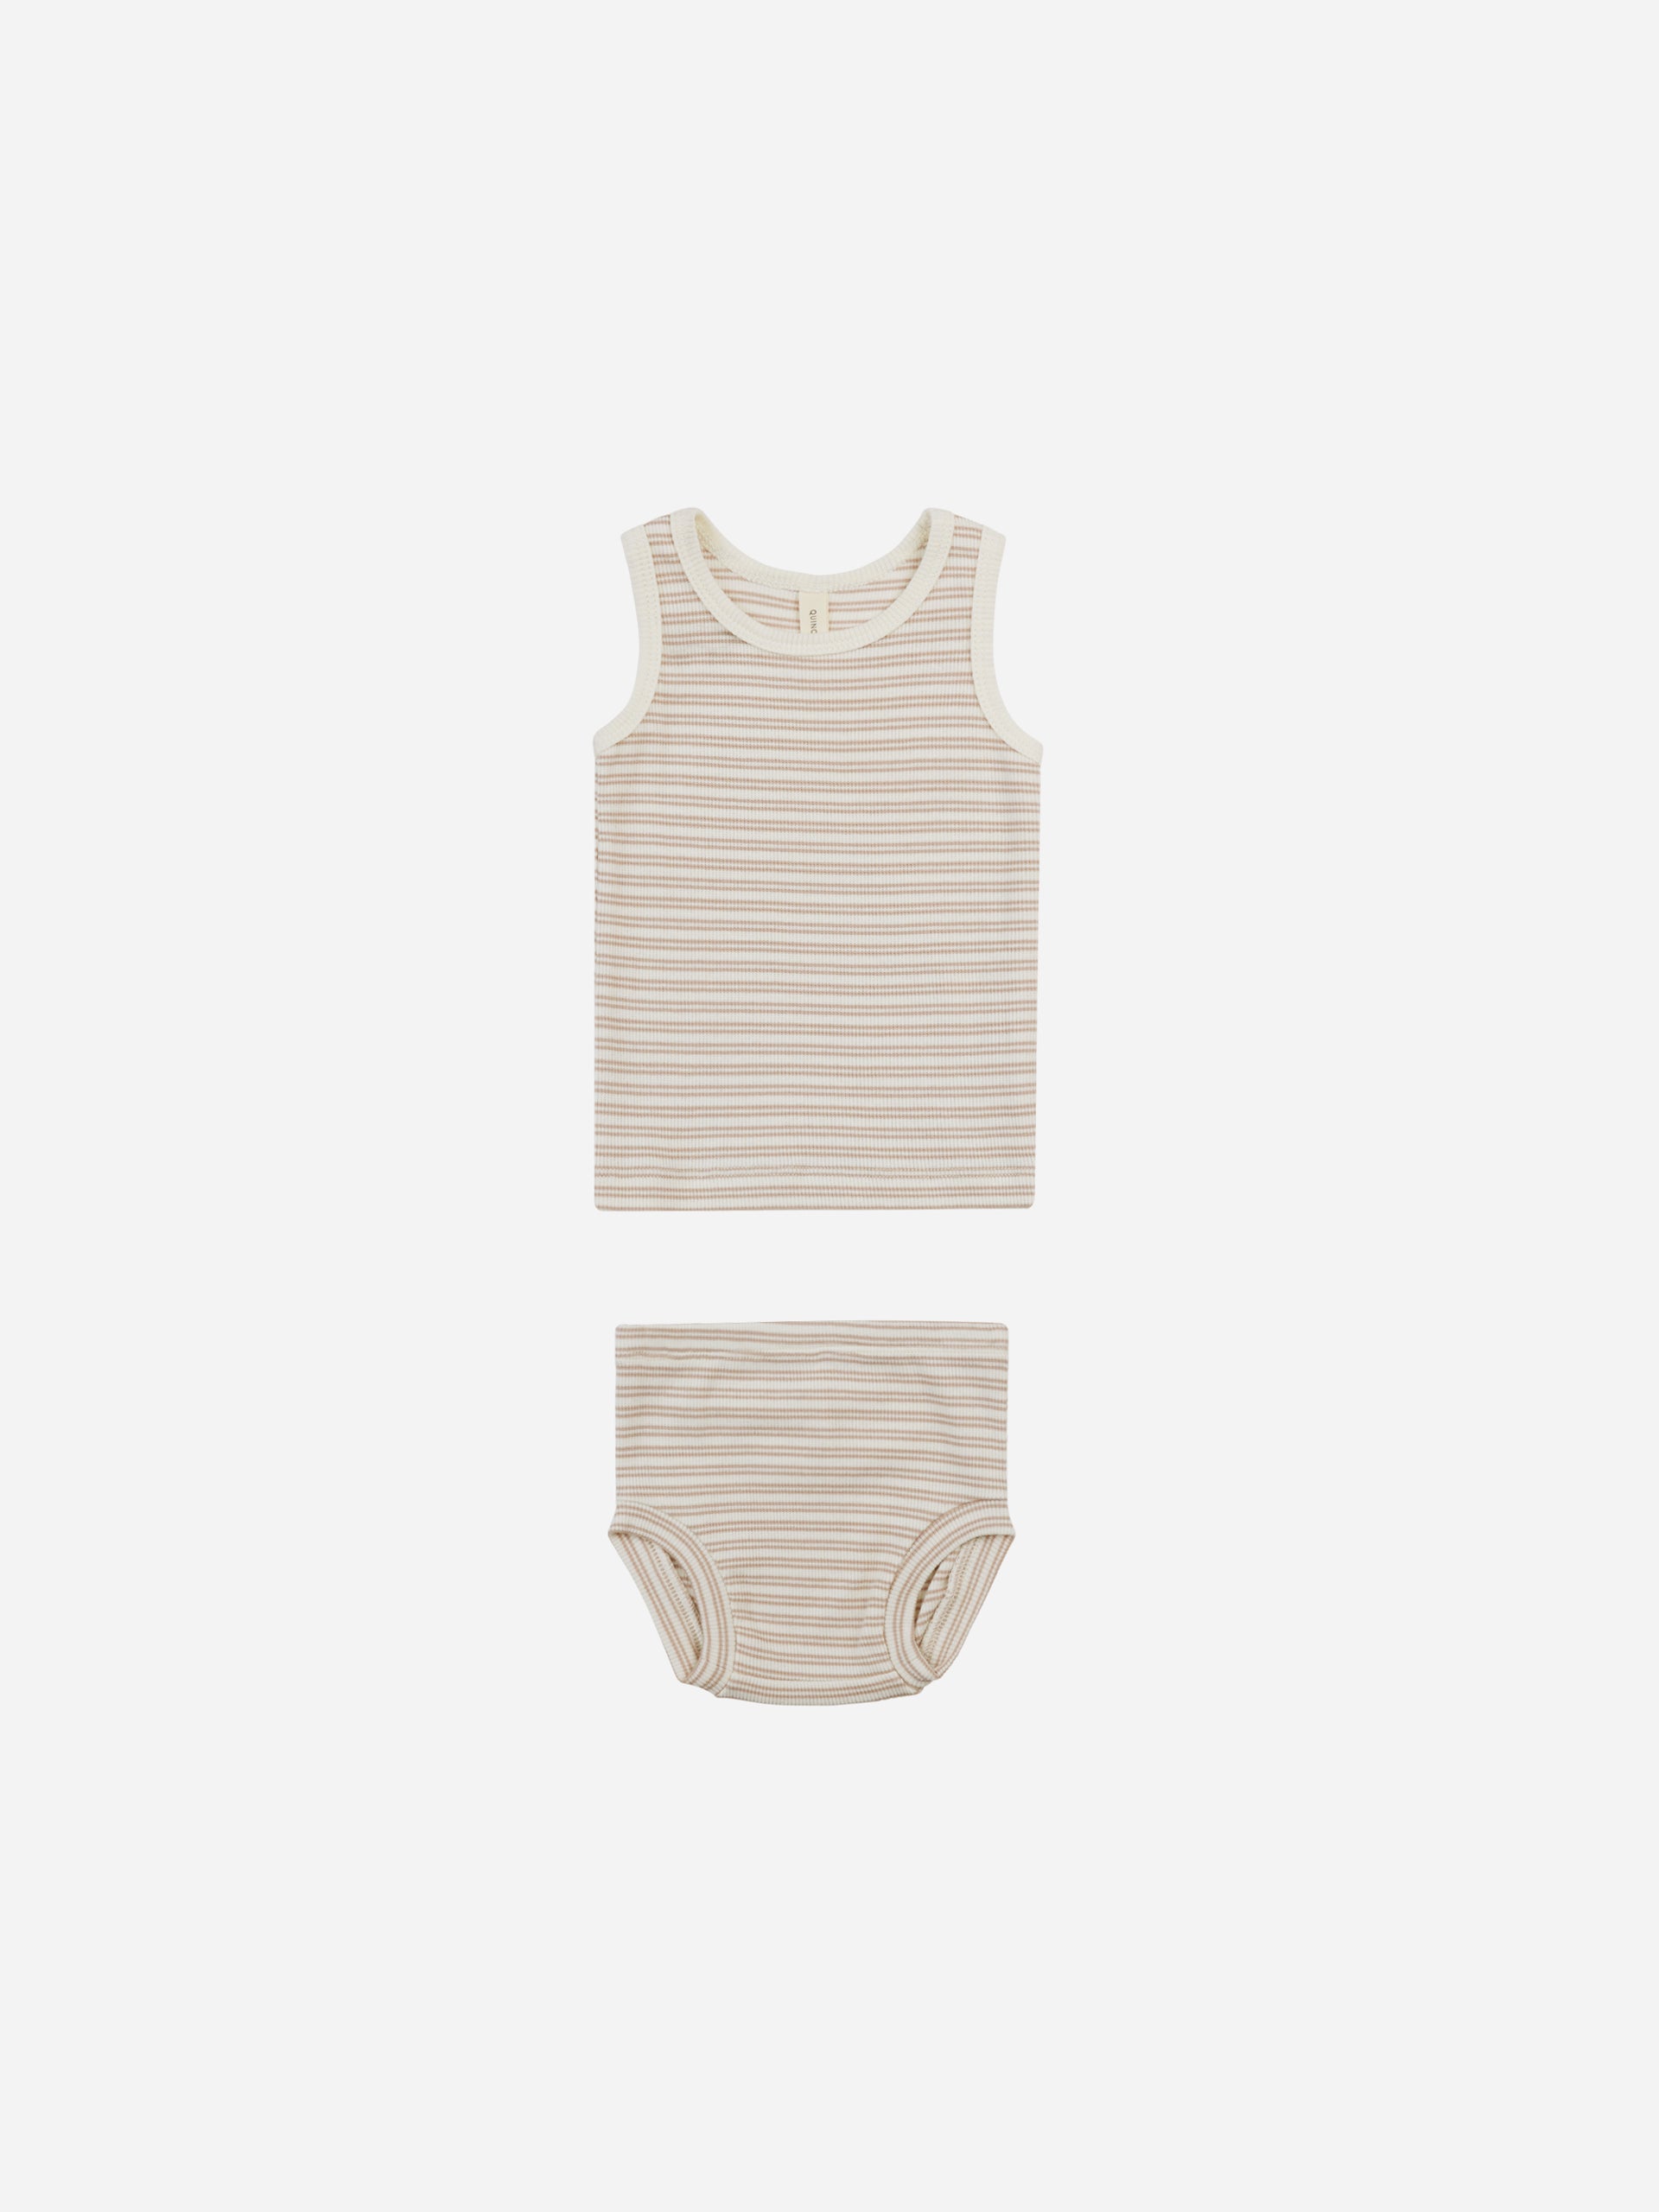 Ribbed Tank + Bloomer Set || Oat Stripe - Rylee + Cru | Kids Clothes | Trendy Baby Clothes | Modern Infant Outfits |